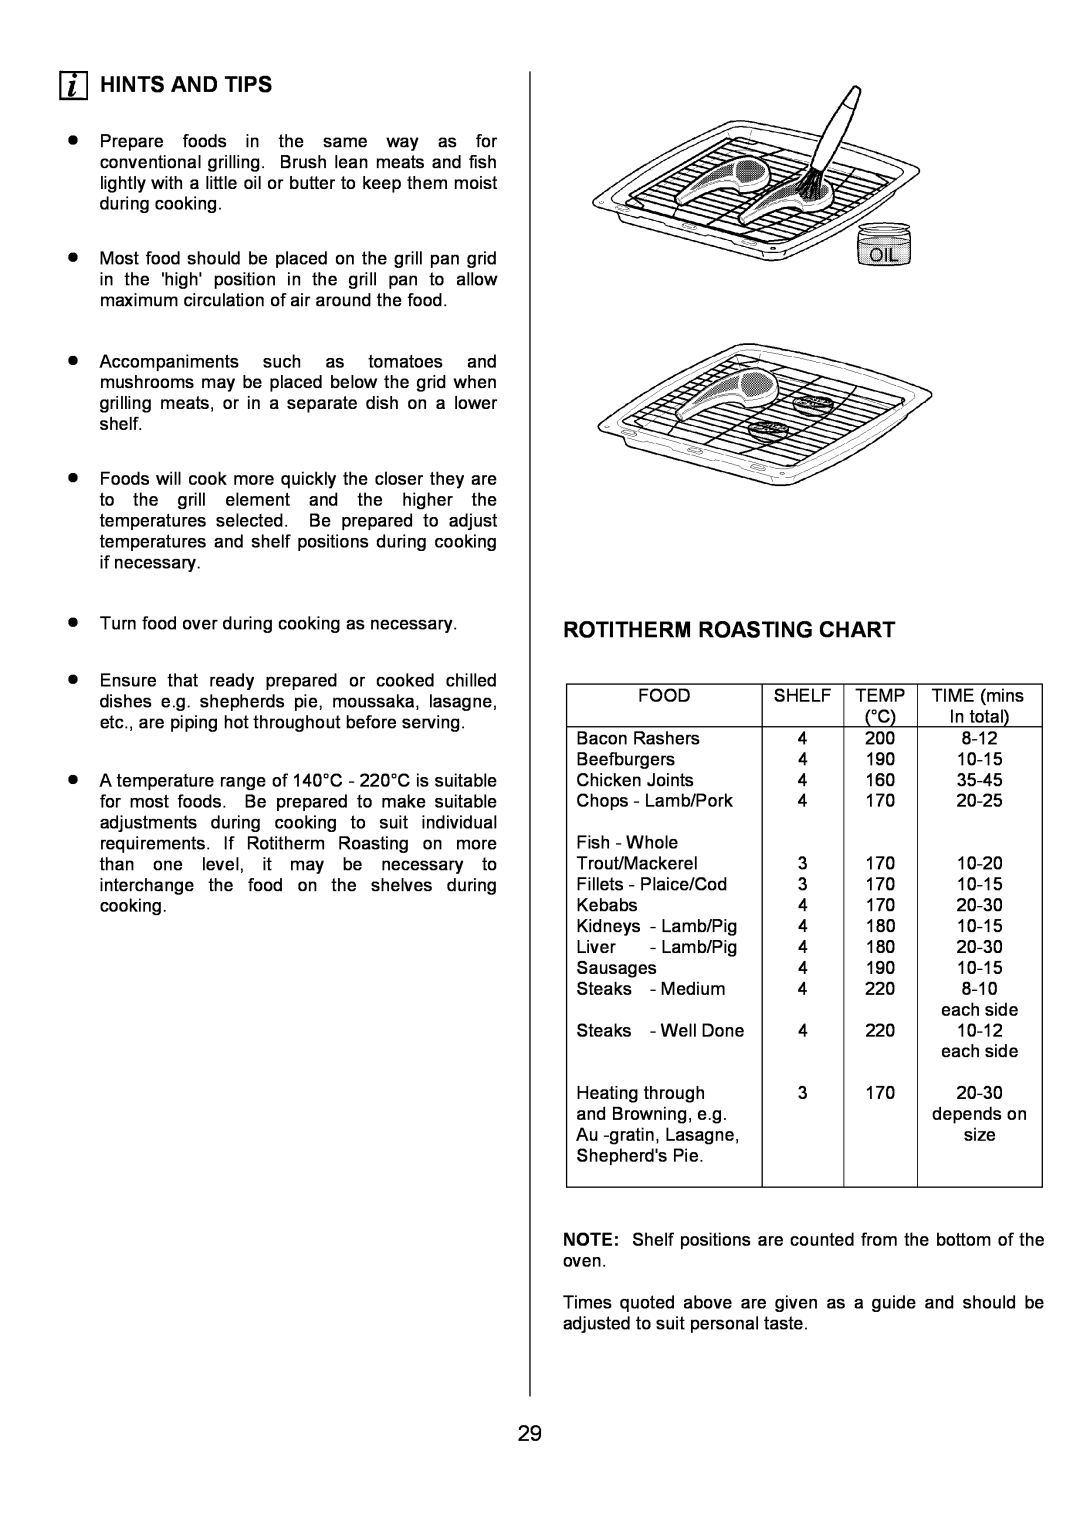 Electrolux D4101-4 operating instructions Rotitherm Roasting Chart, Hints And Tips 